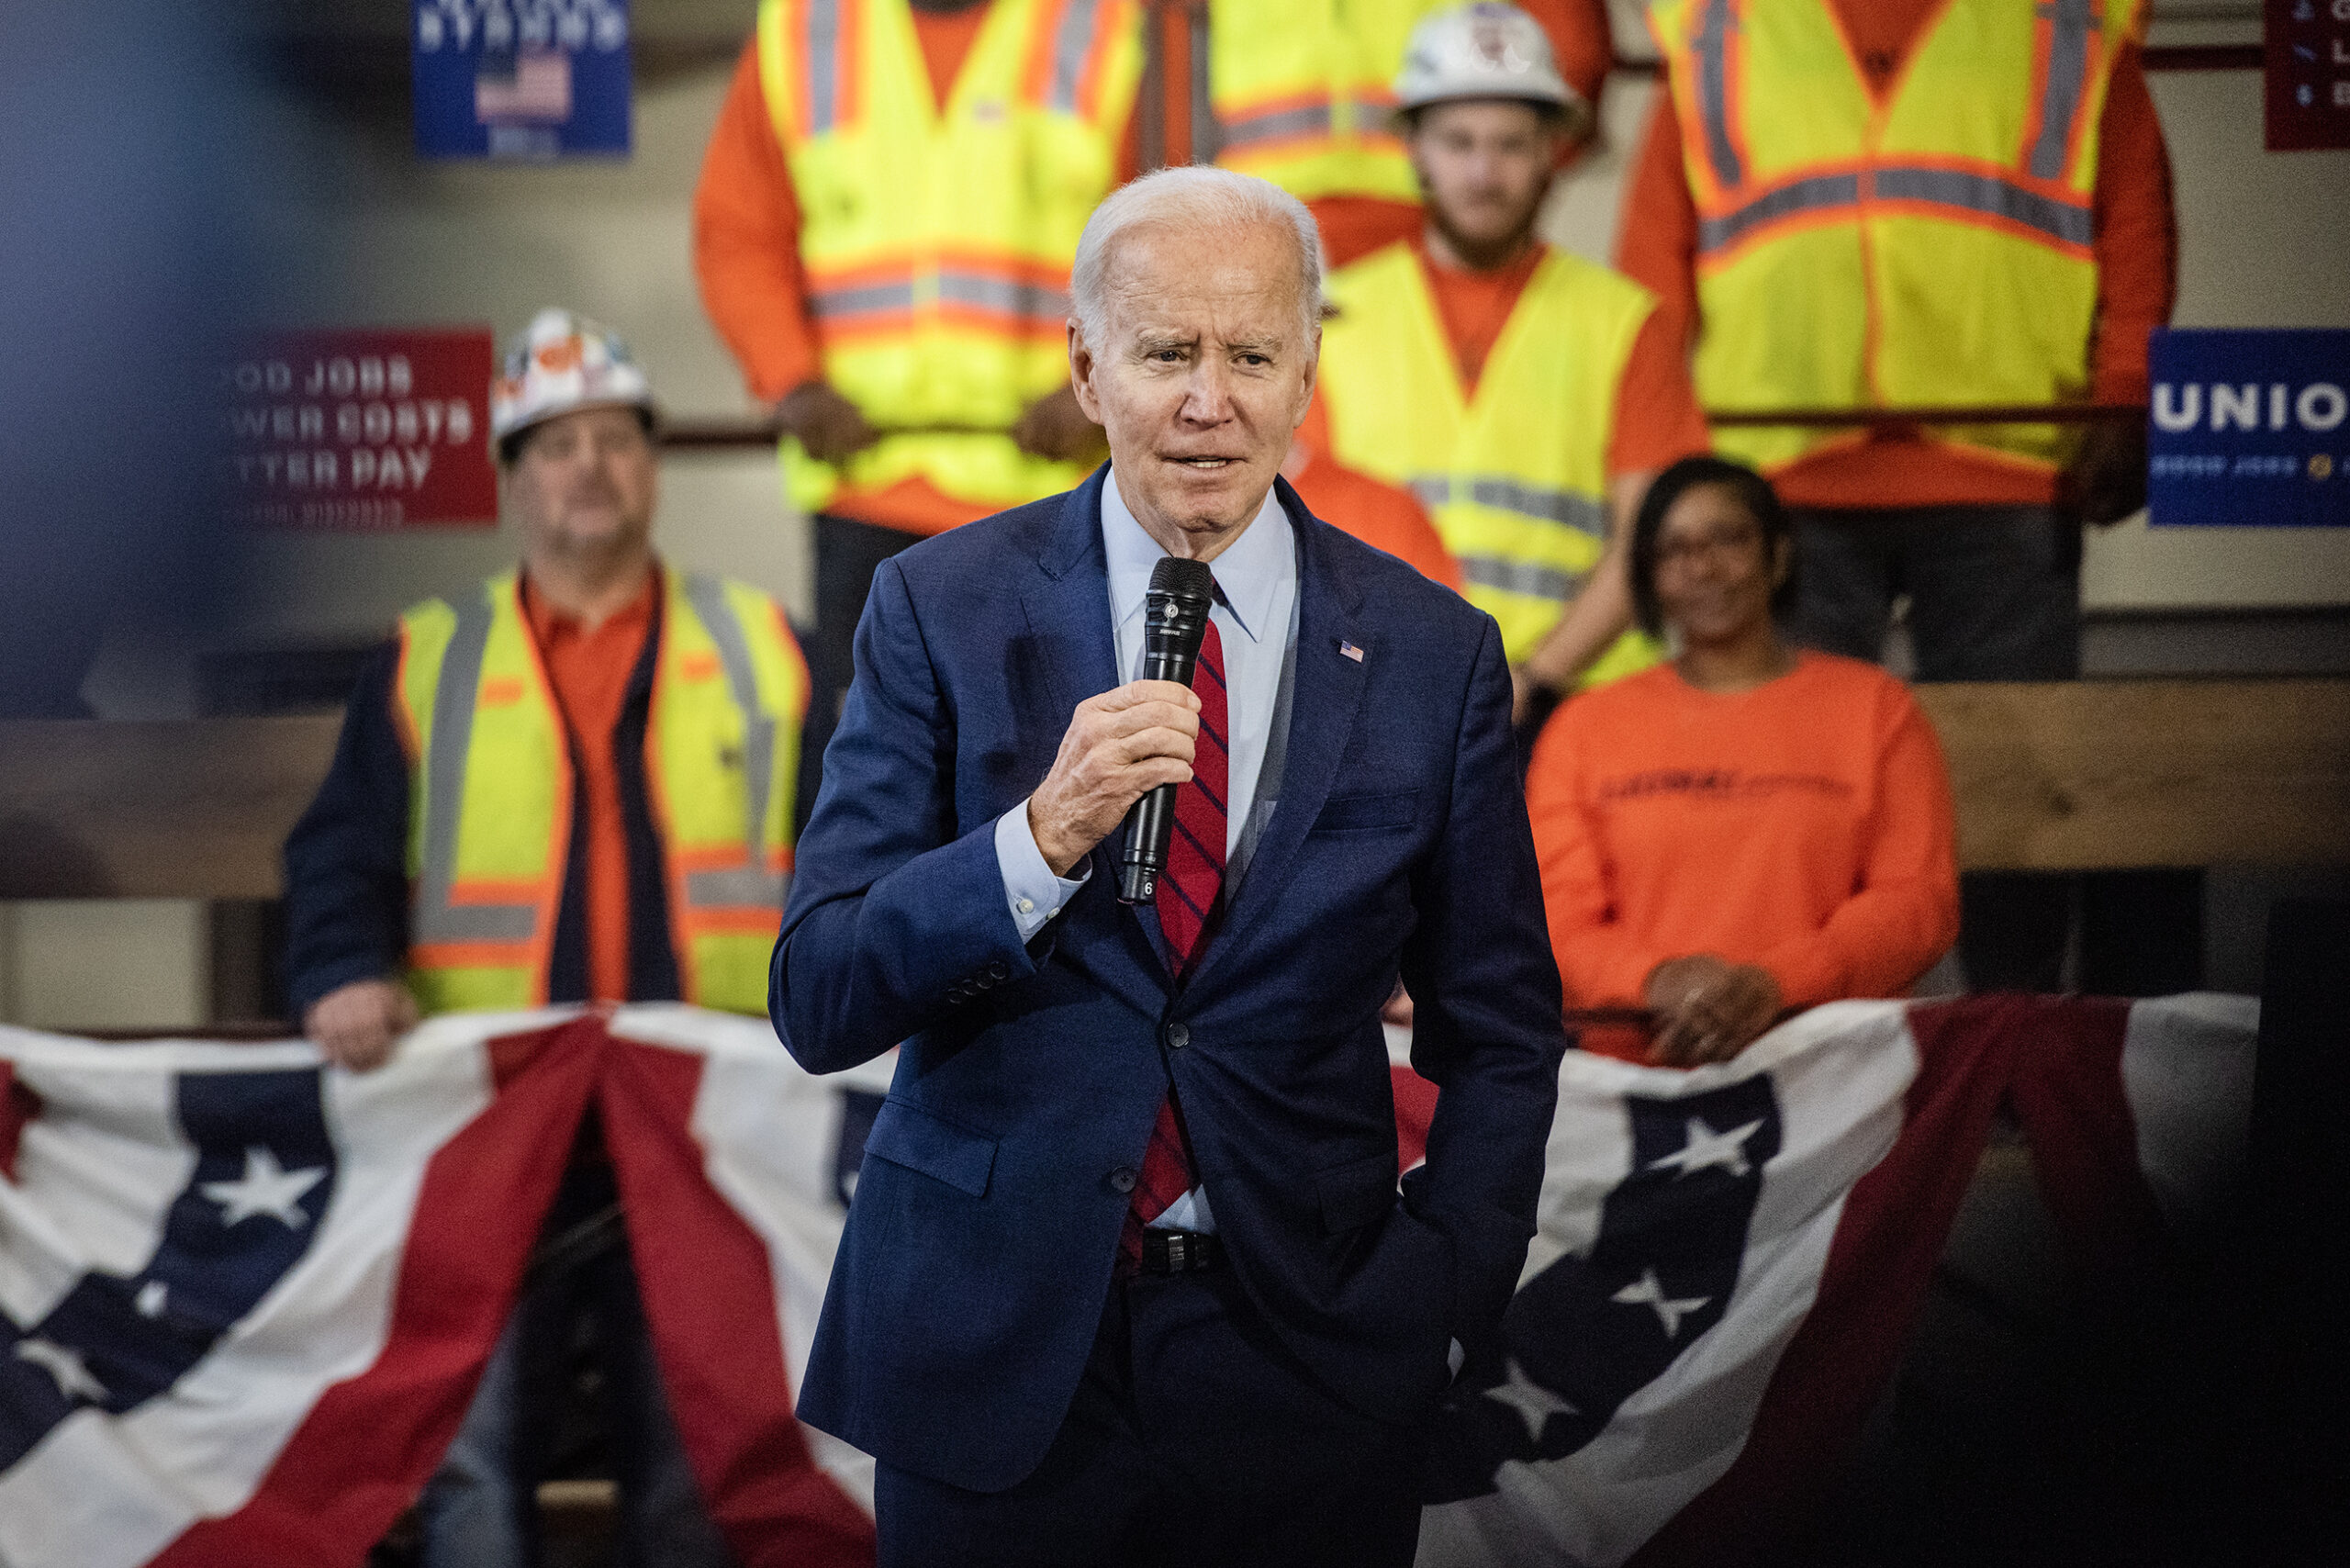 Biden is returning to Madison for rally Friday